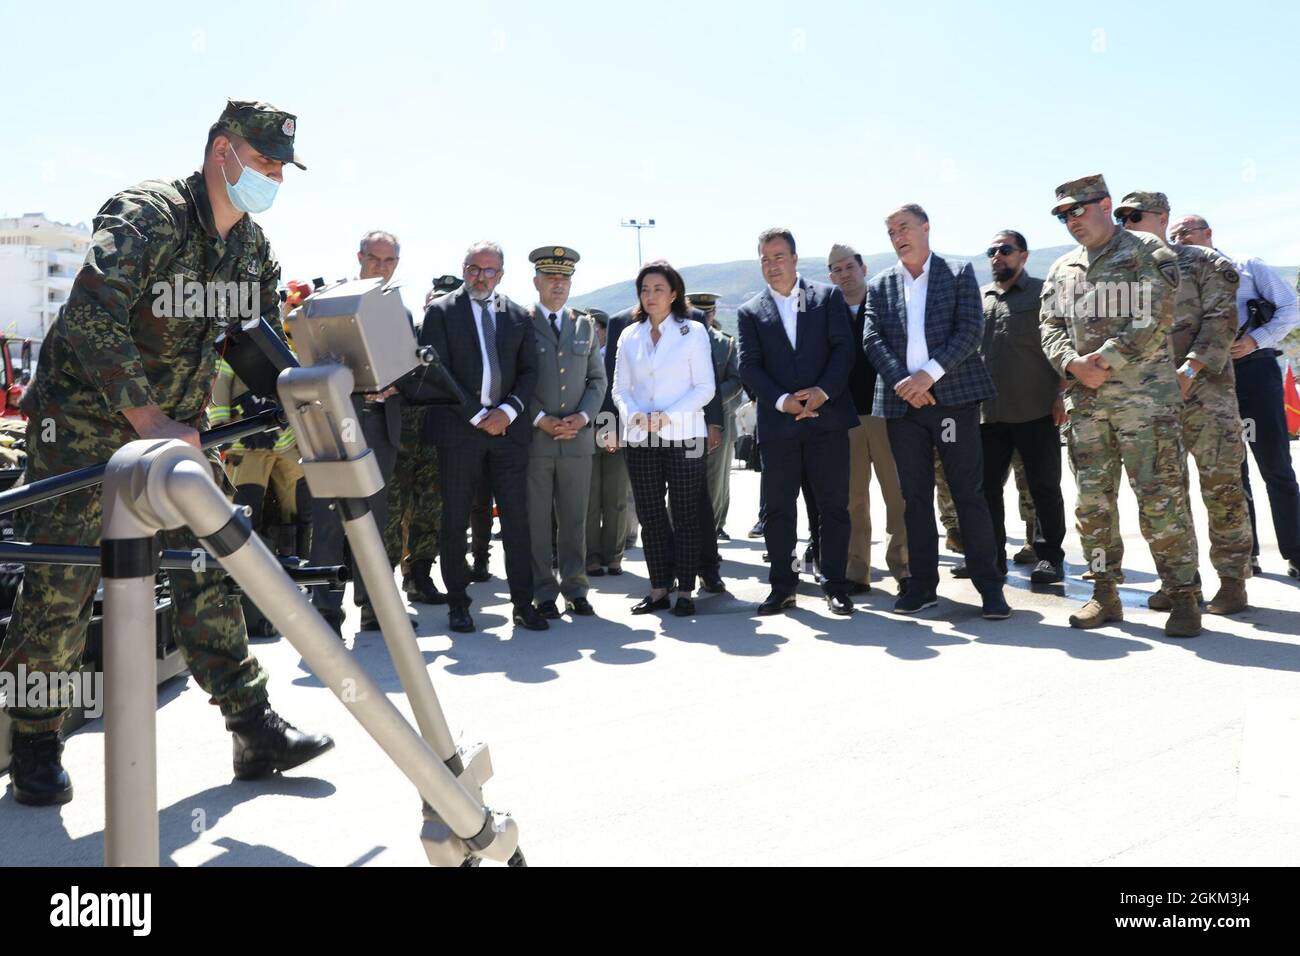 The Albanian Armed Forces Explosive Ordnance Disposal (EOD) unit shows off U.S. donated equipment , including robots designed to move explosive devices and keep military personnel safely out of harm's way May 22, 2021, at a military sponsored open house in Vlore, Albania, held as part of DEFENDER-Europe 21 activities.  During the event, U.S. Ambassador to Albania Yuri Kim was briefed on the equipment and the continued U.S. commitment to peace and security in Albania, which includes decontamination of landmine and unexploded ordnance sites left over from previous conflict here. DEFENDER-Europe Stock Photo